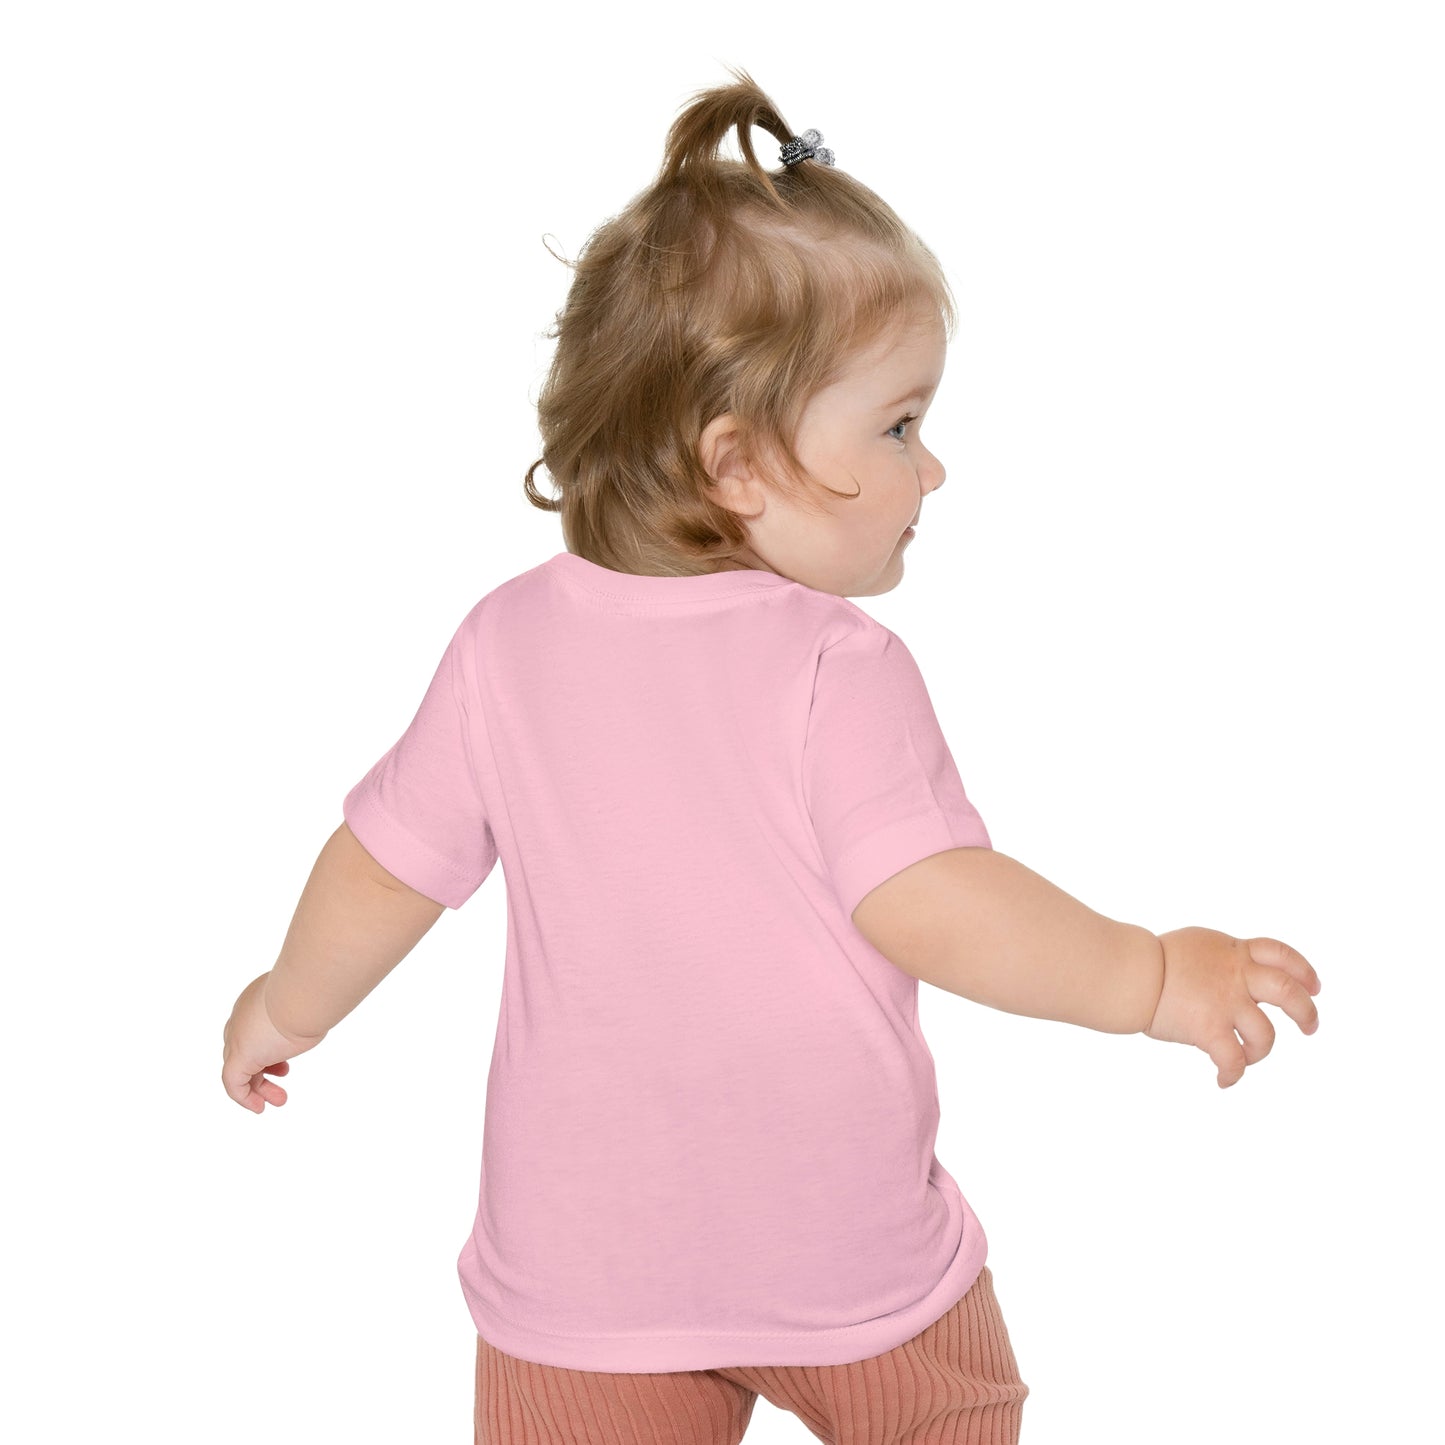 Mock up of the back of the pink t-shirt as seen on a child